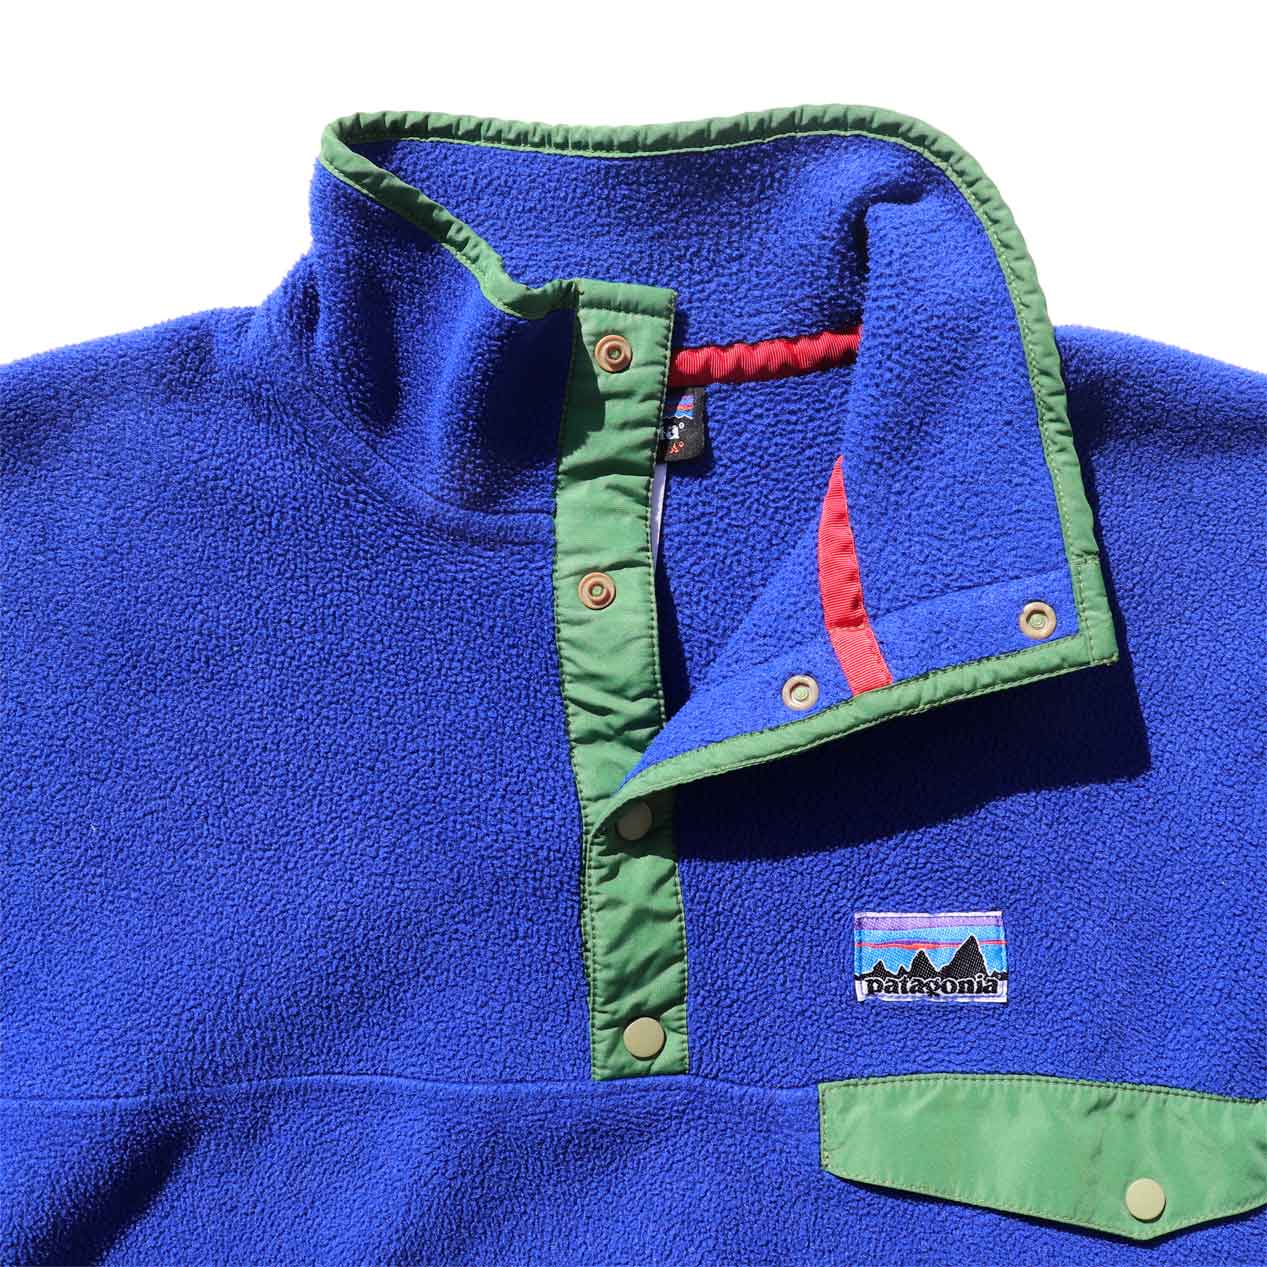 POST JUNK / '08 PATAGONIA x URBAN OUTFITTERS Synchilla Snap-T [L]